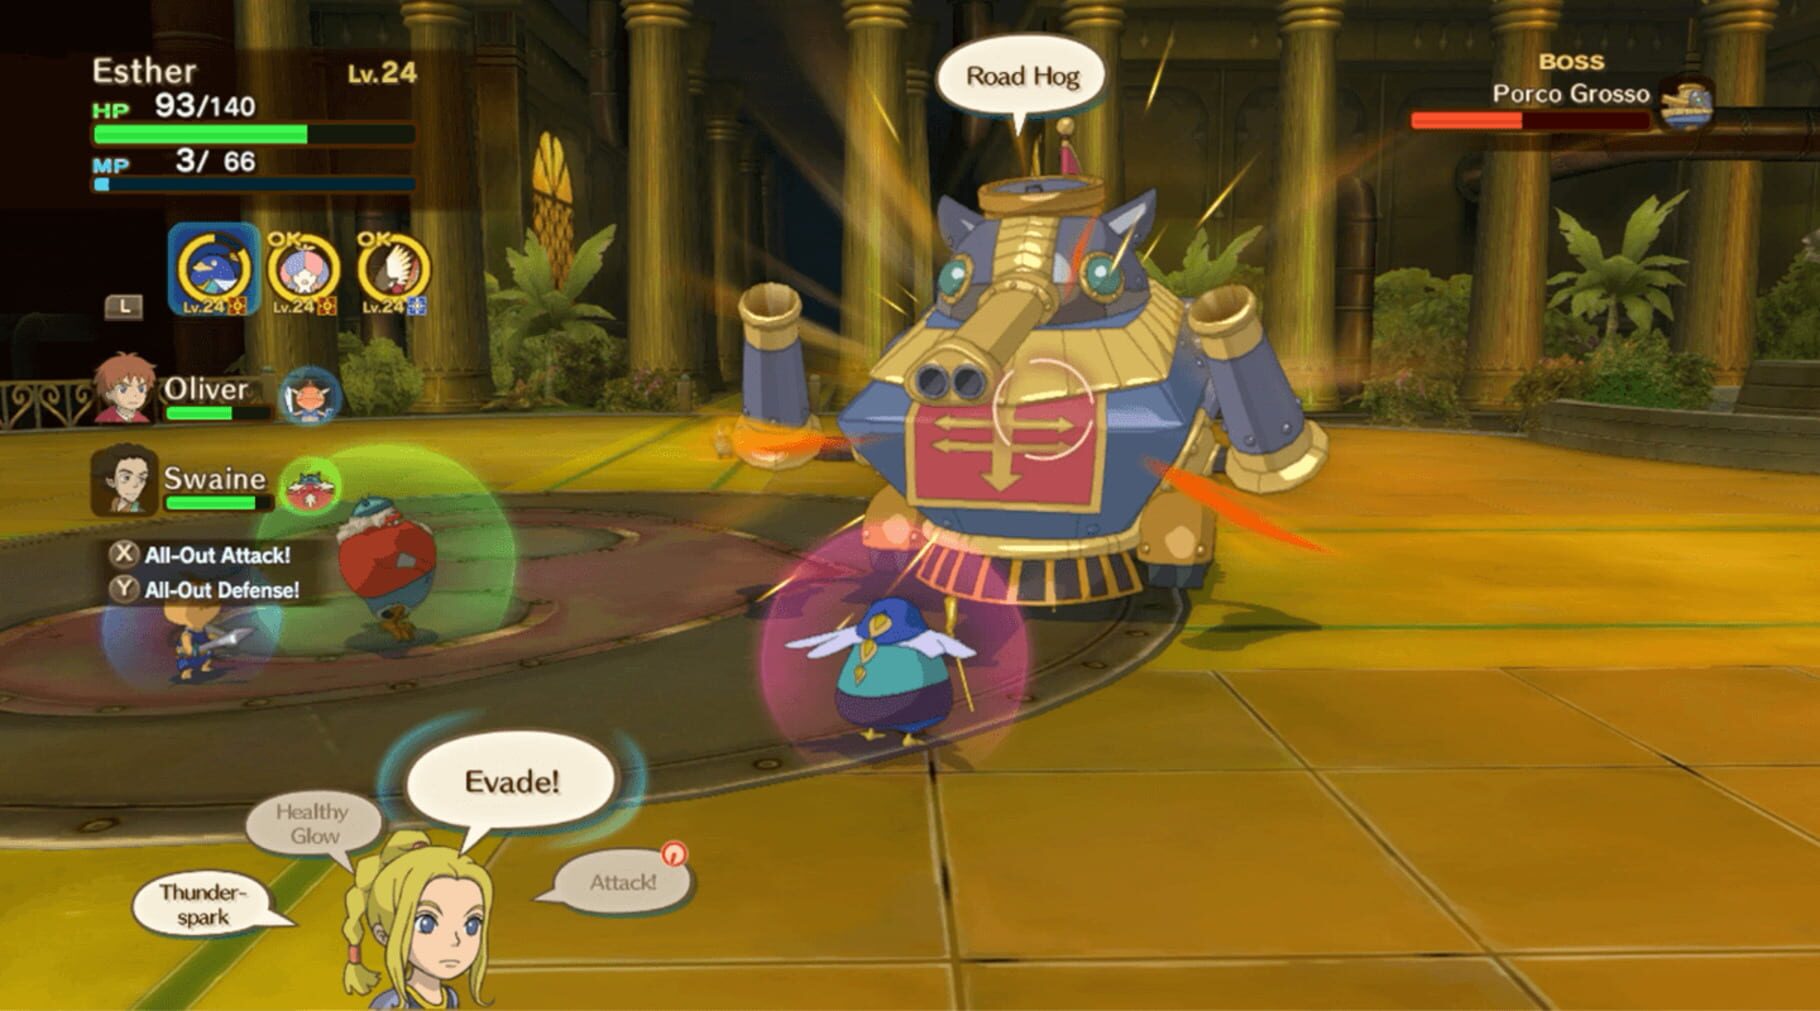 Screenshot for Ni no Kuni: Wrath of the White Witch Remastered